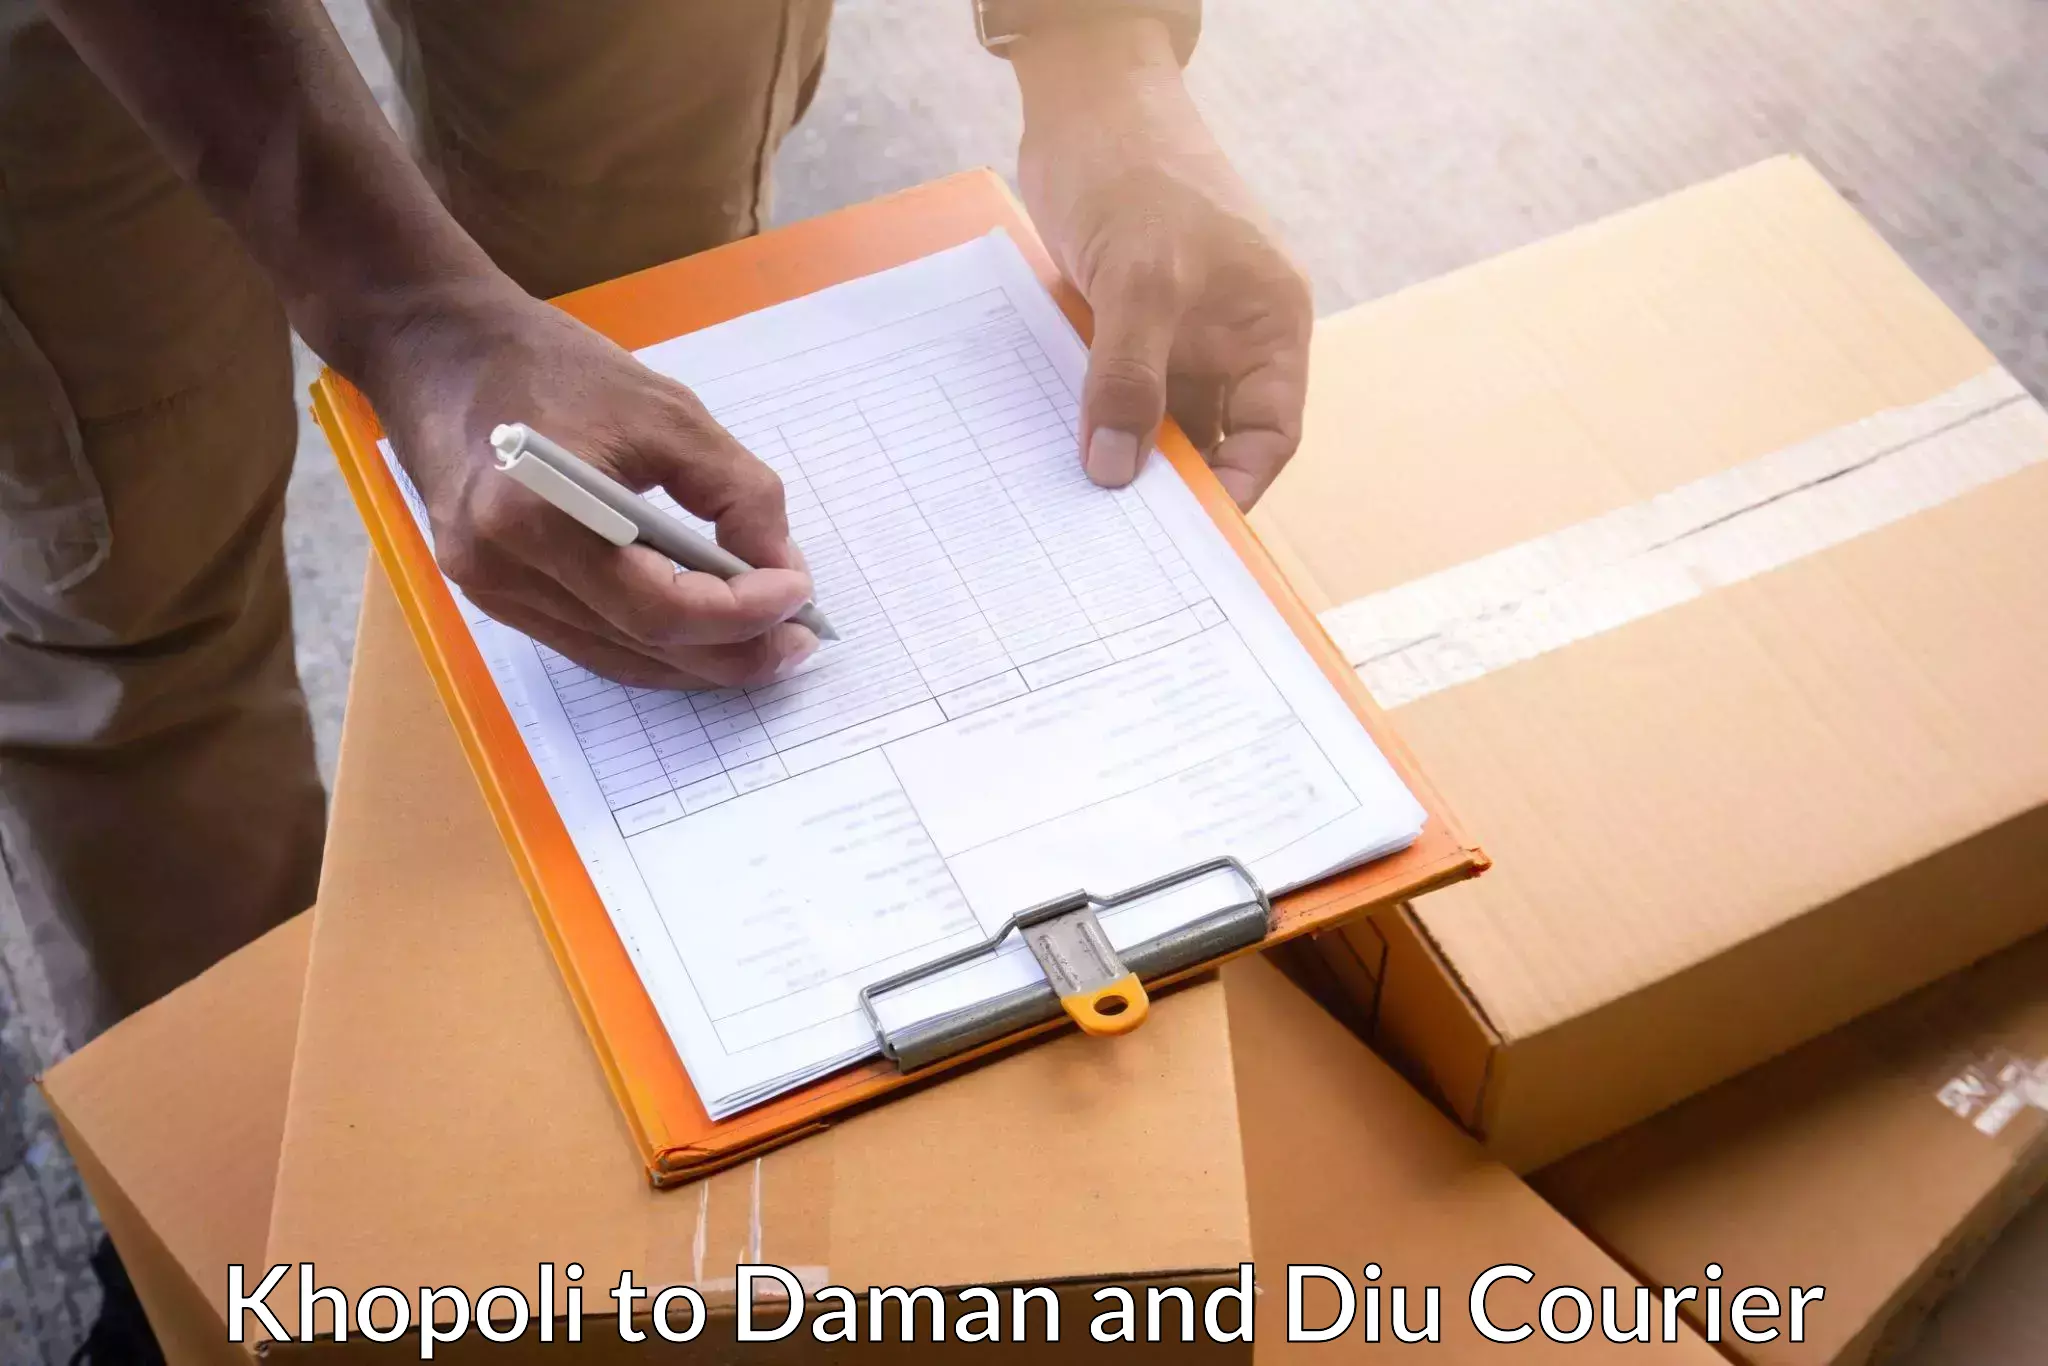 Package delivery network Khopoli to Daman and Diu